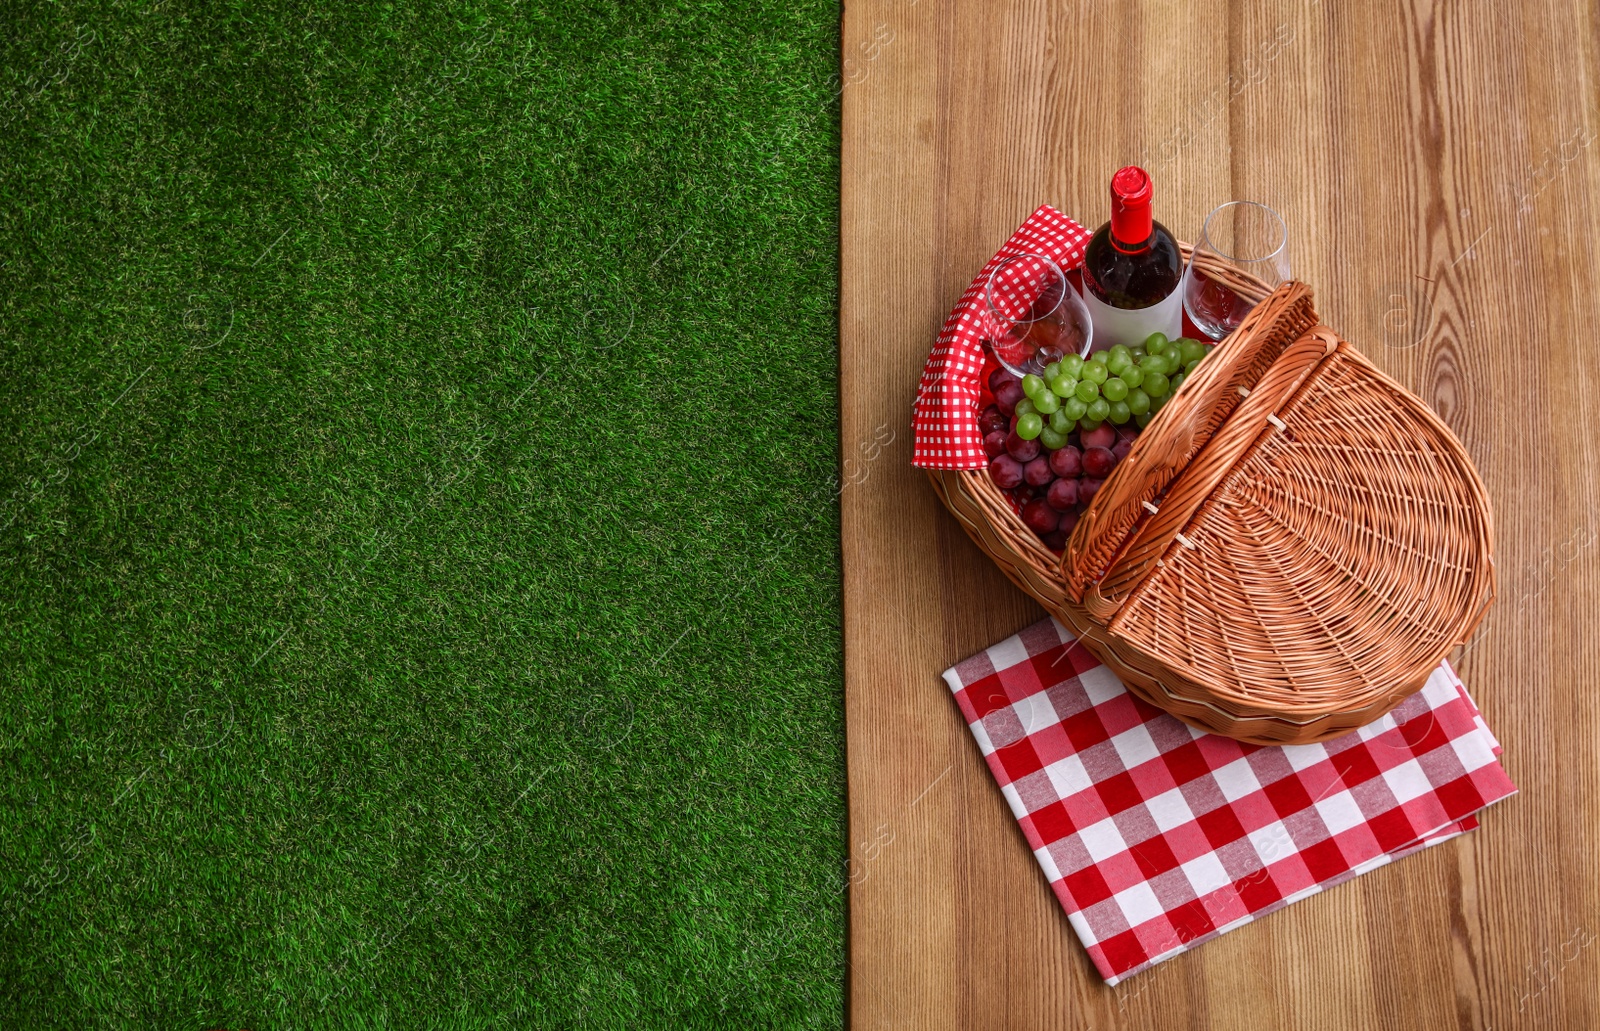 Photo of Picnic basket with wine and grapes on wooden surface outdoor, top view. Space for text